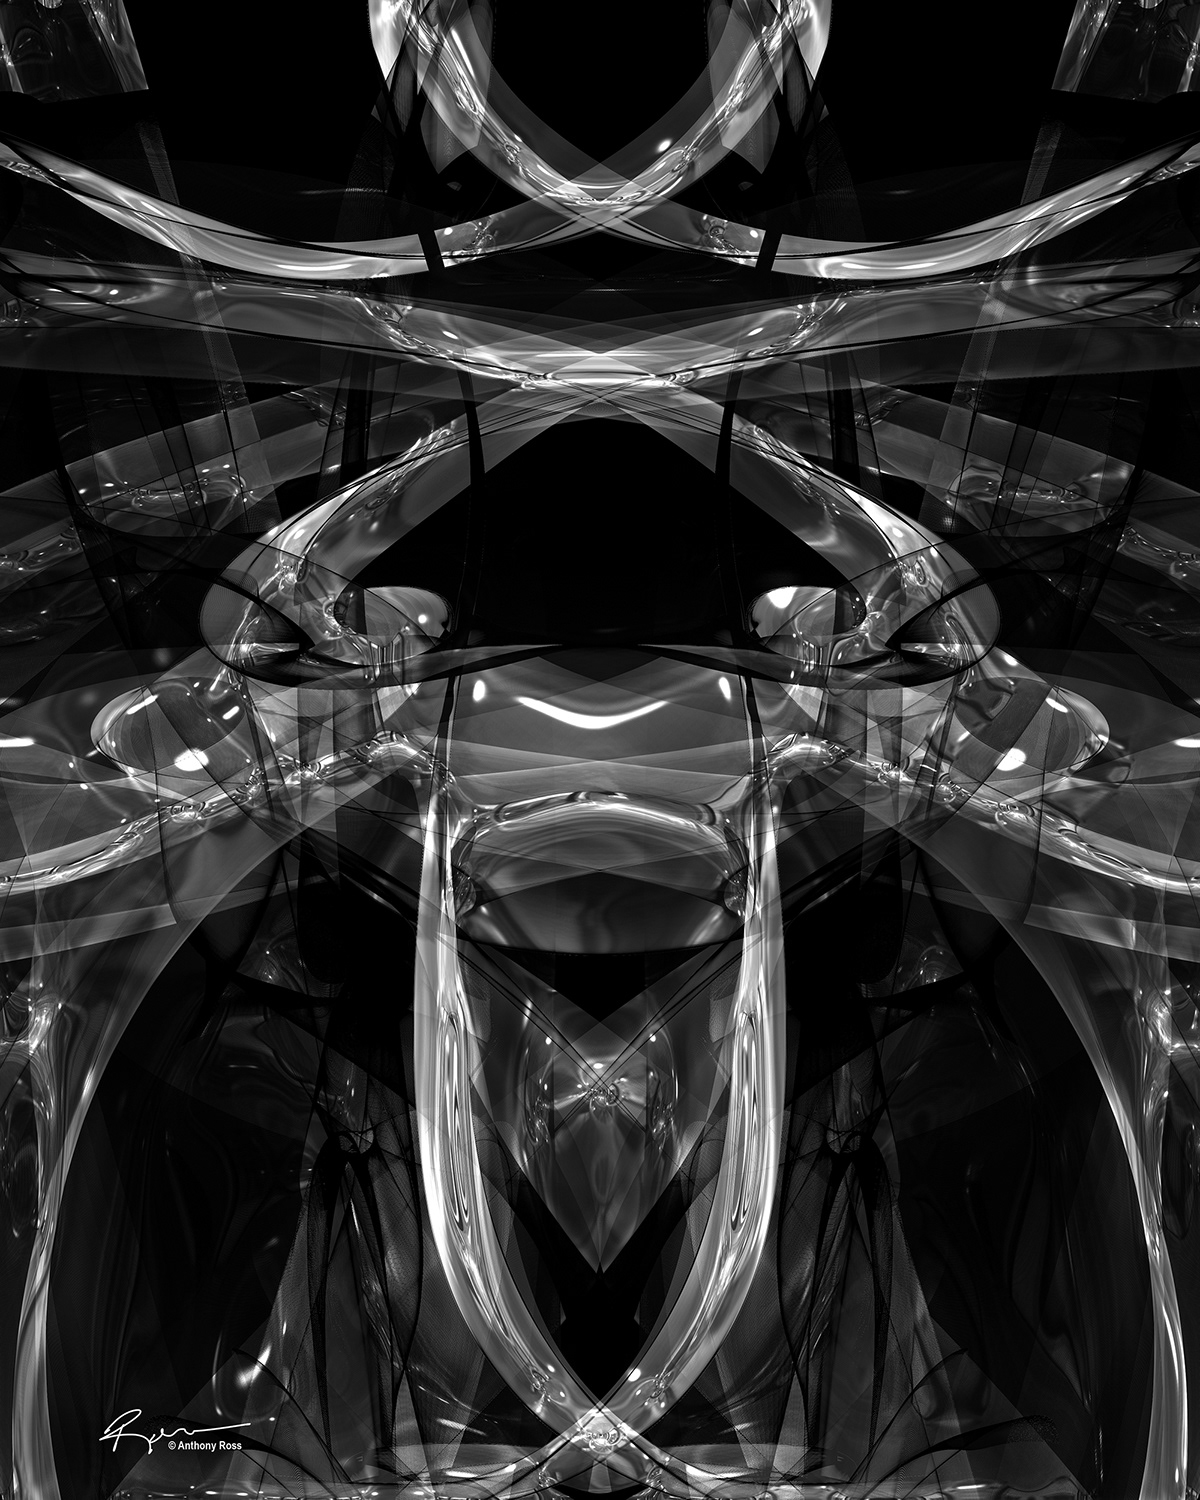 Rorschach test abstract art backdrop background backgrounds black black and white bright curve decoration design digital element geometric glow graphic harmony illustration light lotus pattern peace peaceful pure serenity shape texture tranquil tranquility twist visual wallpaper white zen